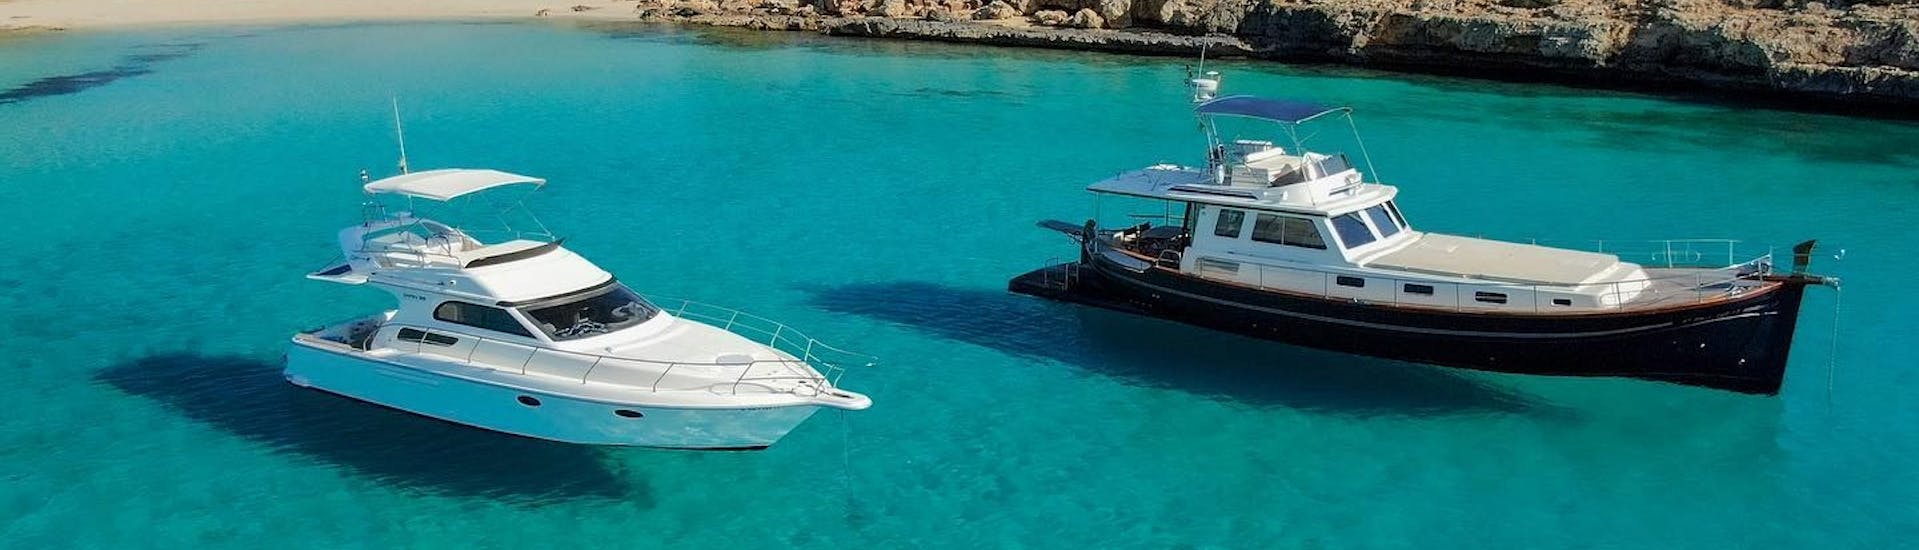 Our boats during a Private Yacht Trip to Cala Varques & Virgili - All Included with Charters Llevant.